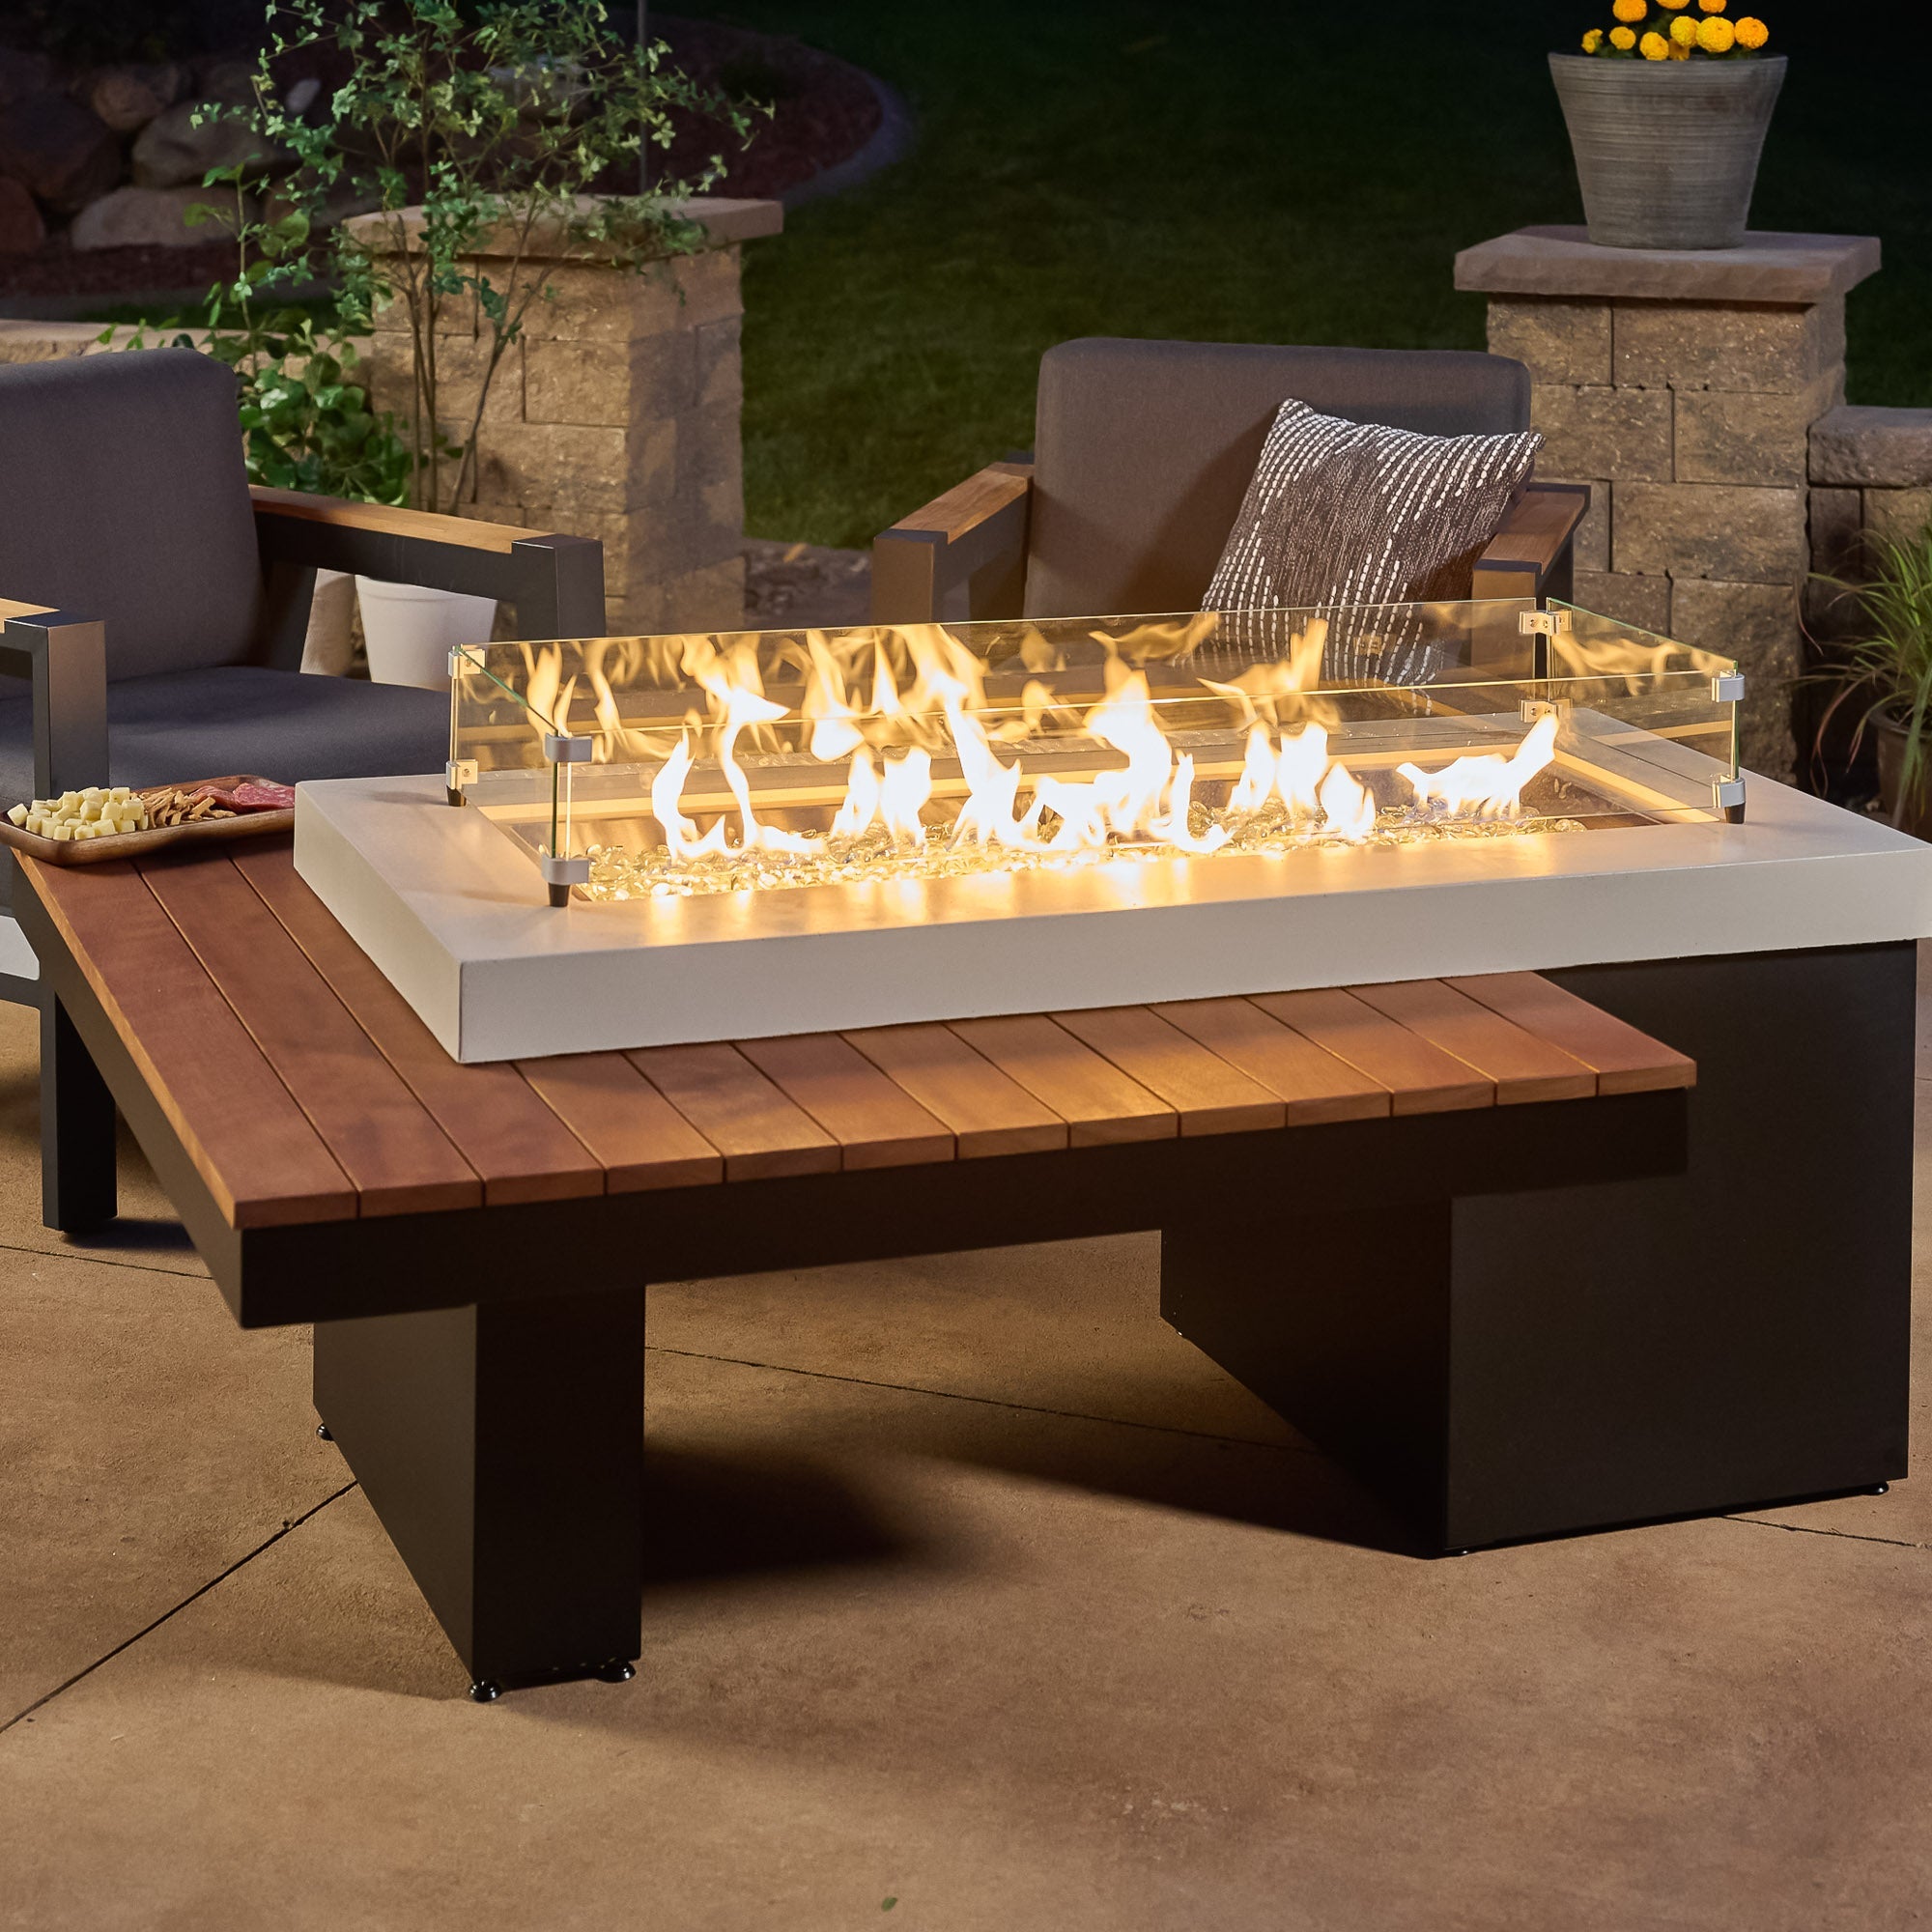 Uptown Iroko Linear Gas Fire Pit Table | Outdoor GreatRooms